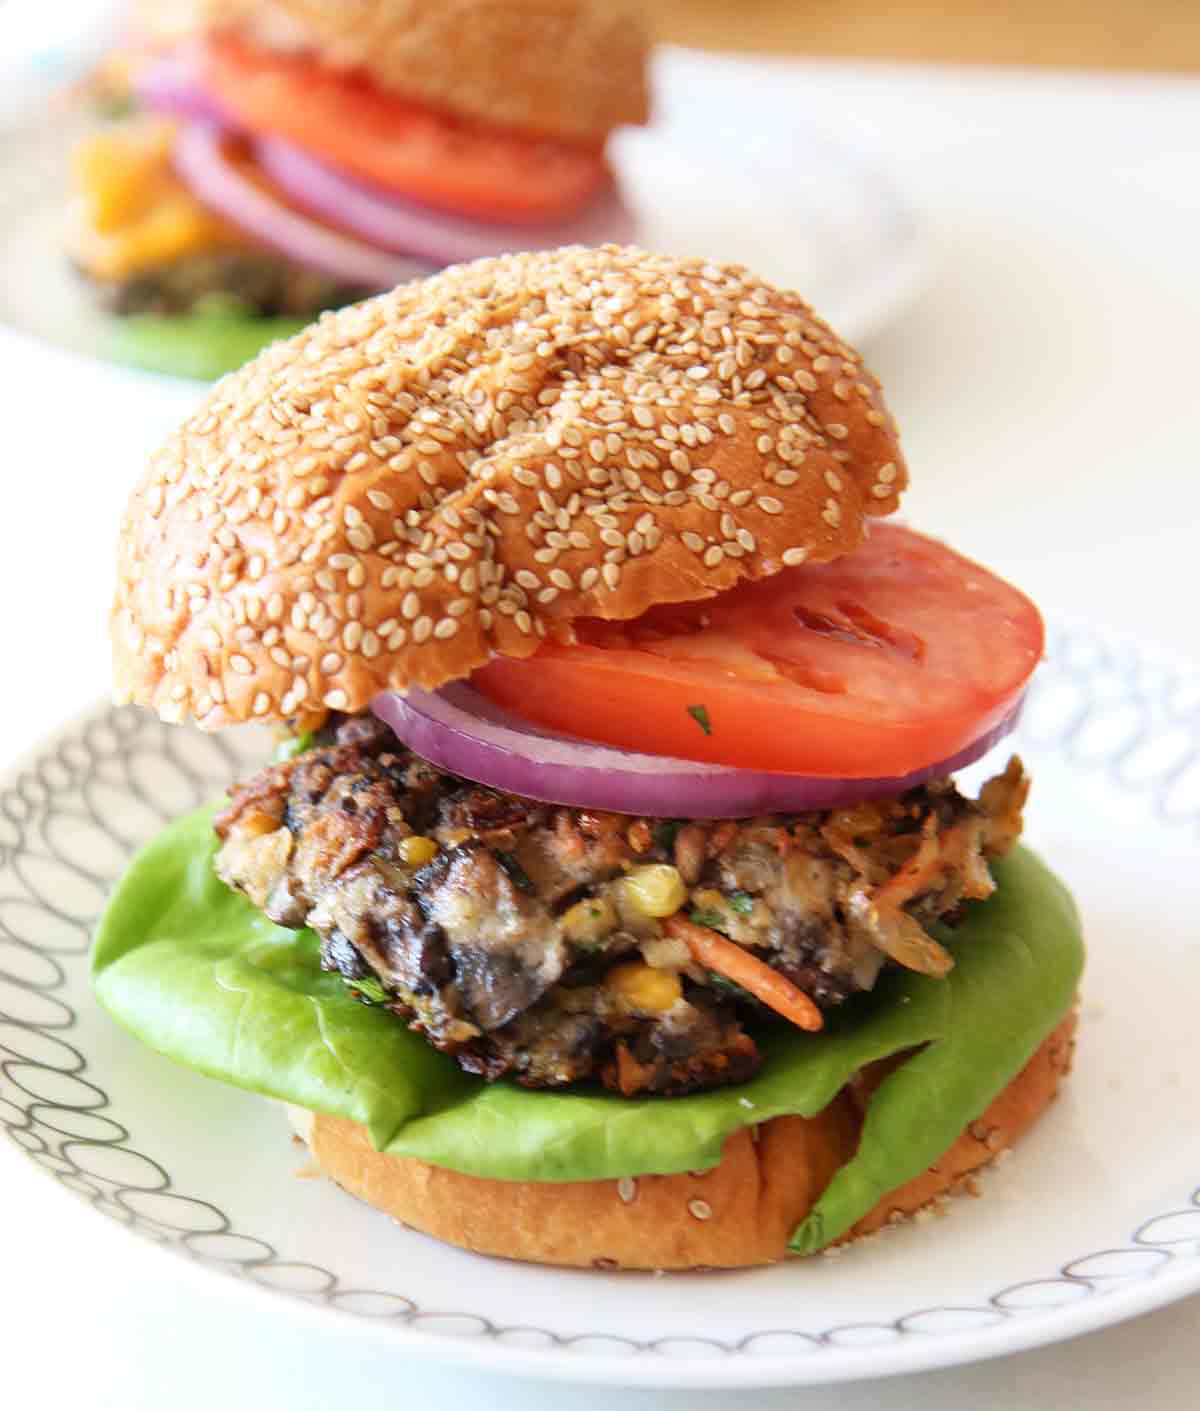 Veggie Burger Recipe. This will convert any meat eater to the veggie side. The beefy portobello, creamy crushed chick peas, and the zesty spices makes a perfect easy burger. Best part it takes 10 minutes to make. ChopHappy.com.